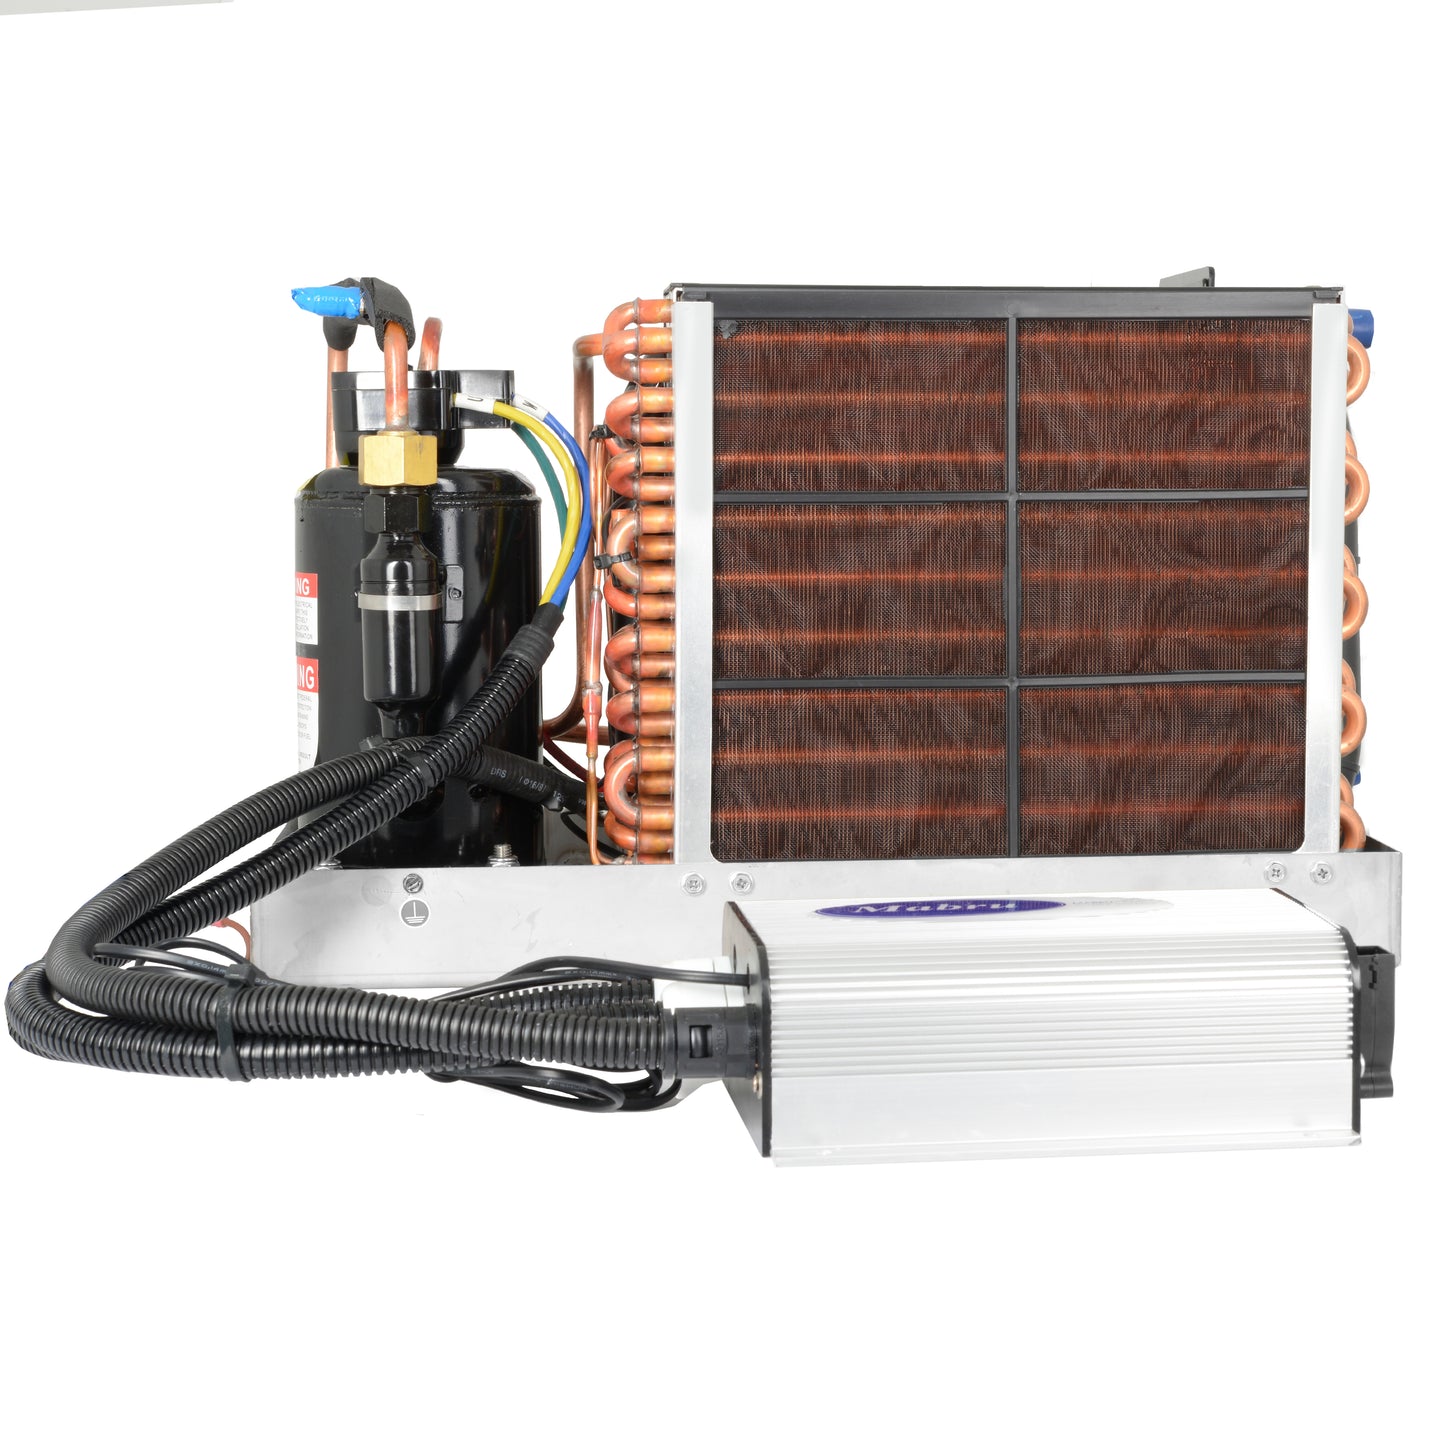 CURRENTLY OUT OF STOCK. FOR PRE-ORDER ONLY**MARINE AIR CONDITIONER SC 12000 BTU 12V DC (COPPER) by MABRU